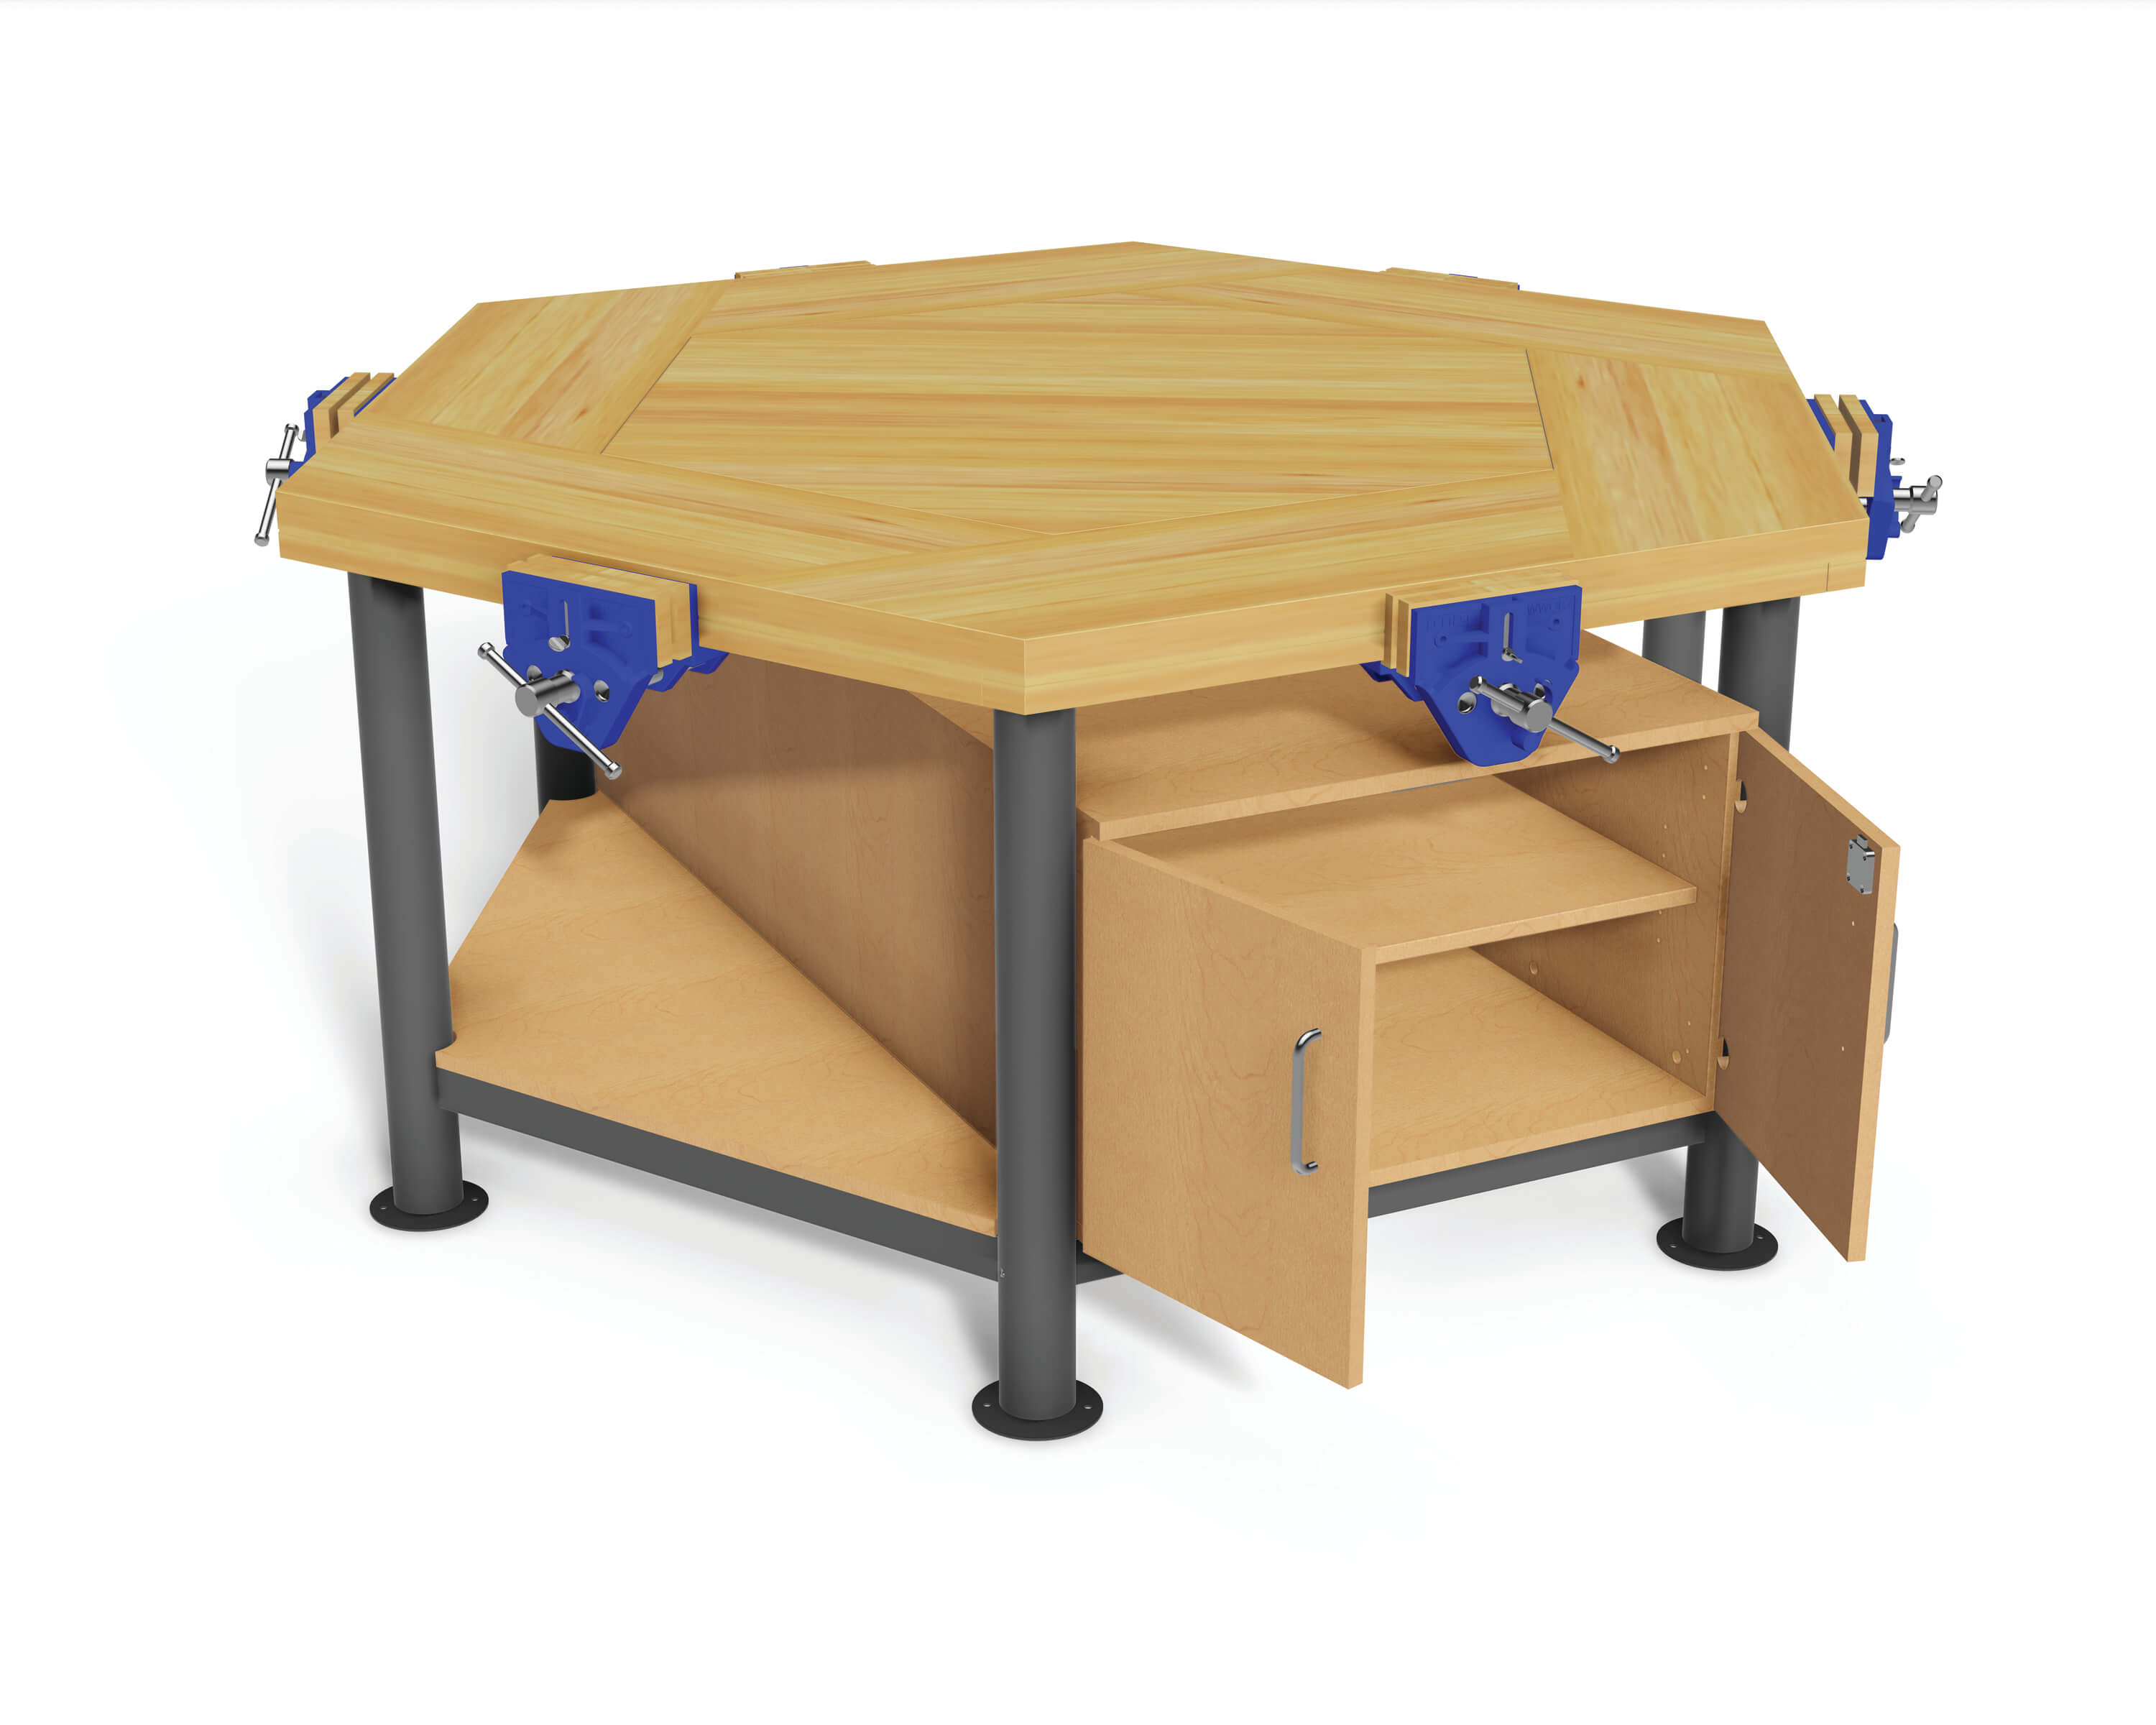 Edubench Hexagonal Six Station Bench - Beech 1600 x 1600 x 825mm with QR vices and under cupboards